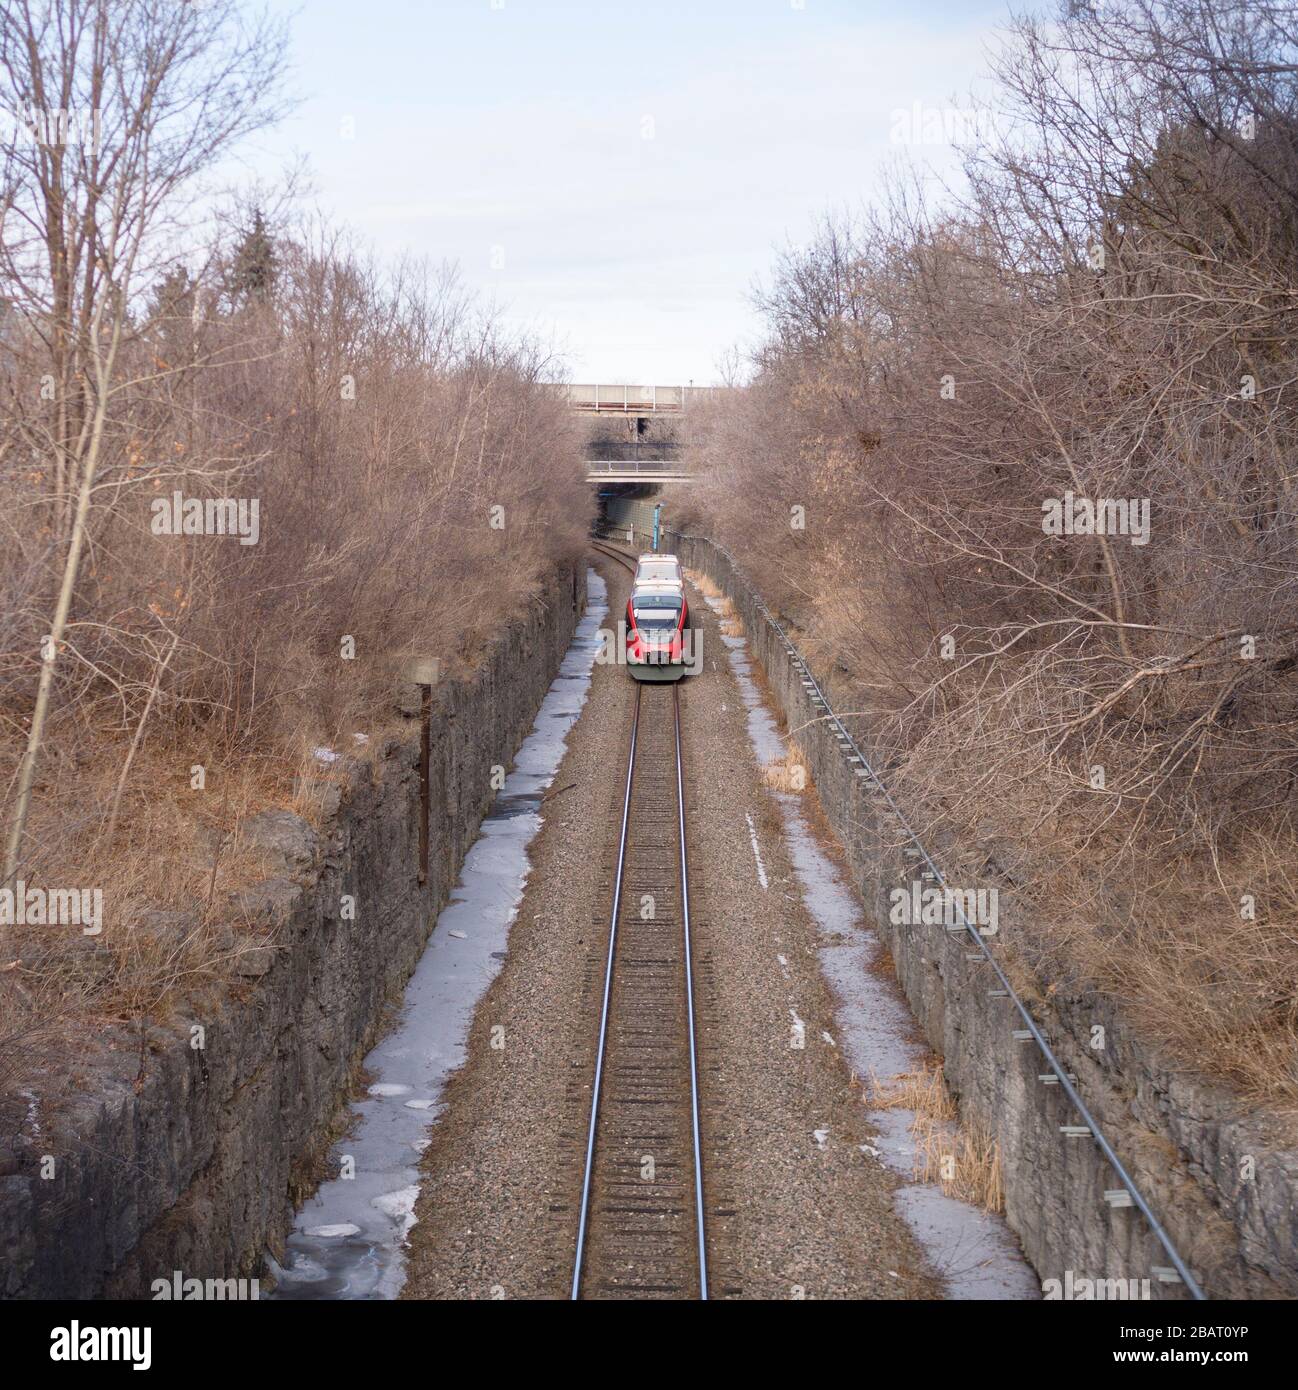 Ottawa's O-Train in a cut: Ottawa's deisel-based O-Train provided limited service on an old train track bed before being superceeded by the electric light rail system in 2019. Stock Photo